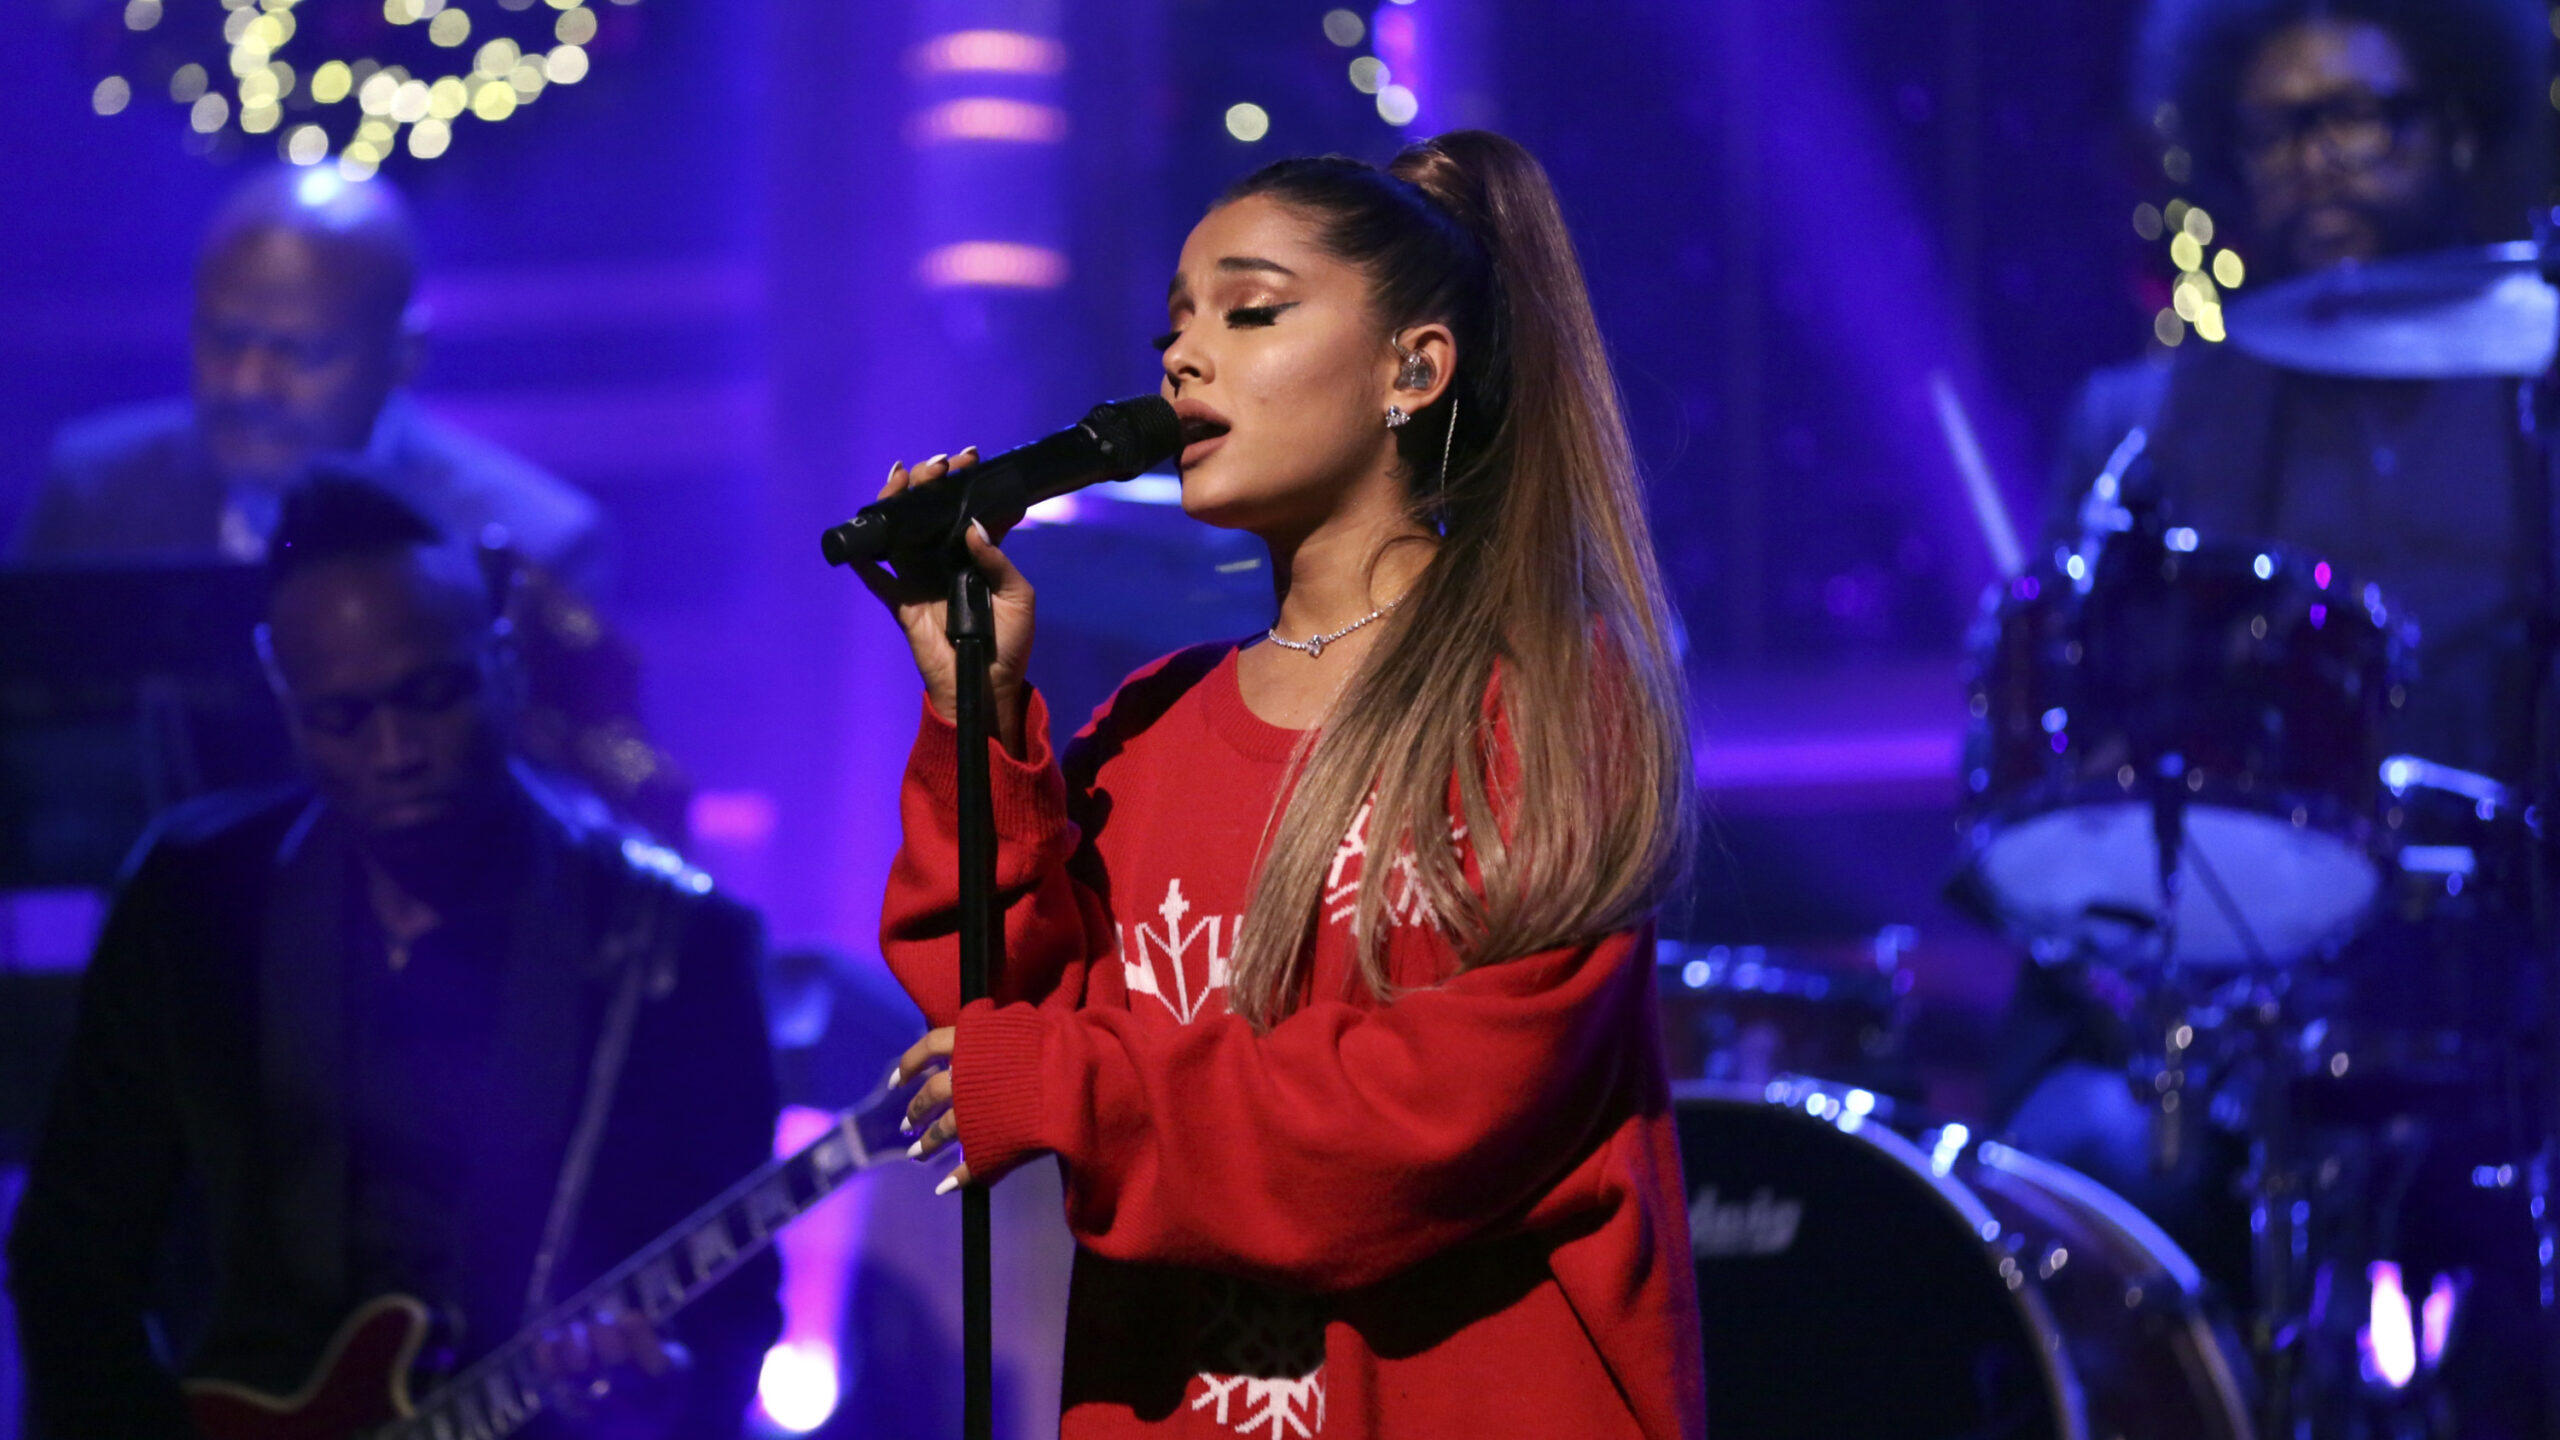 MI5 Had Information That Could Have Prevented Bombing At Ariana Grande Concert, Report Says